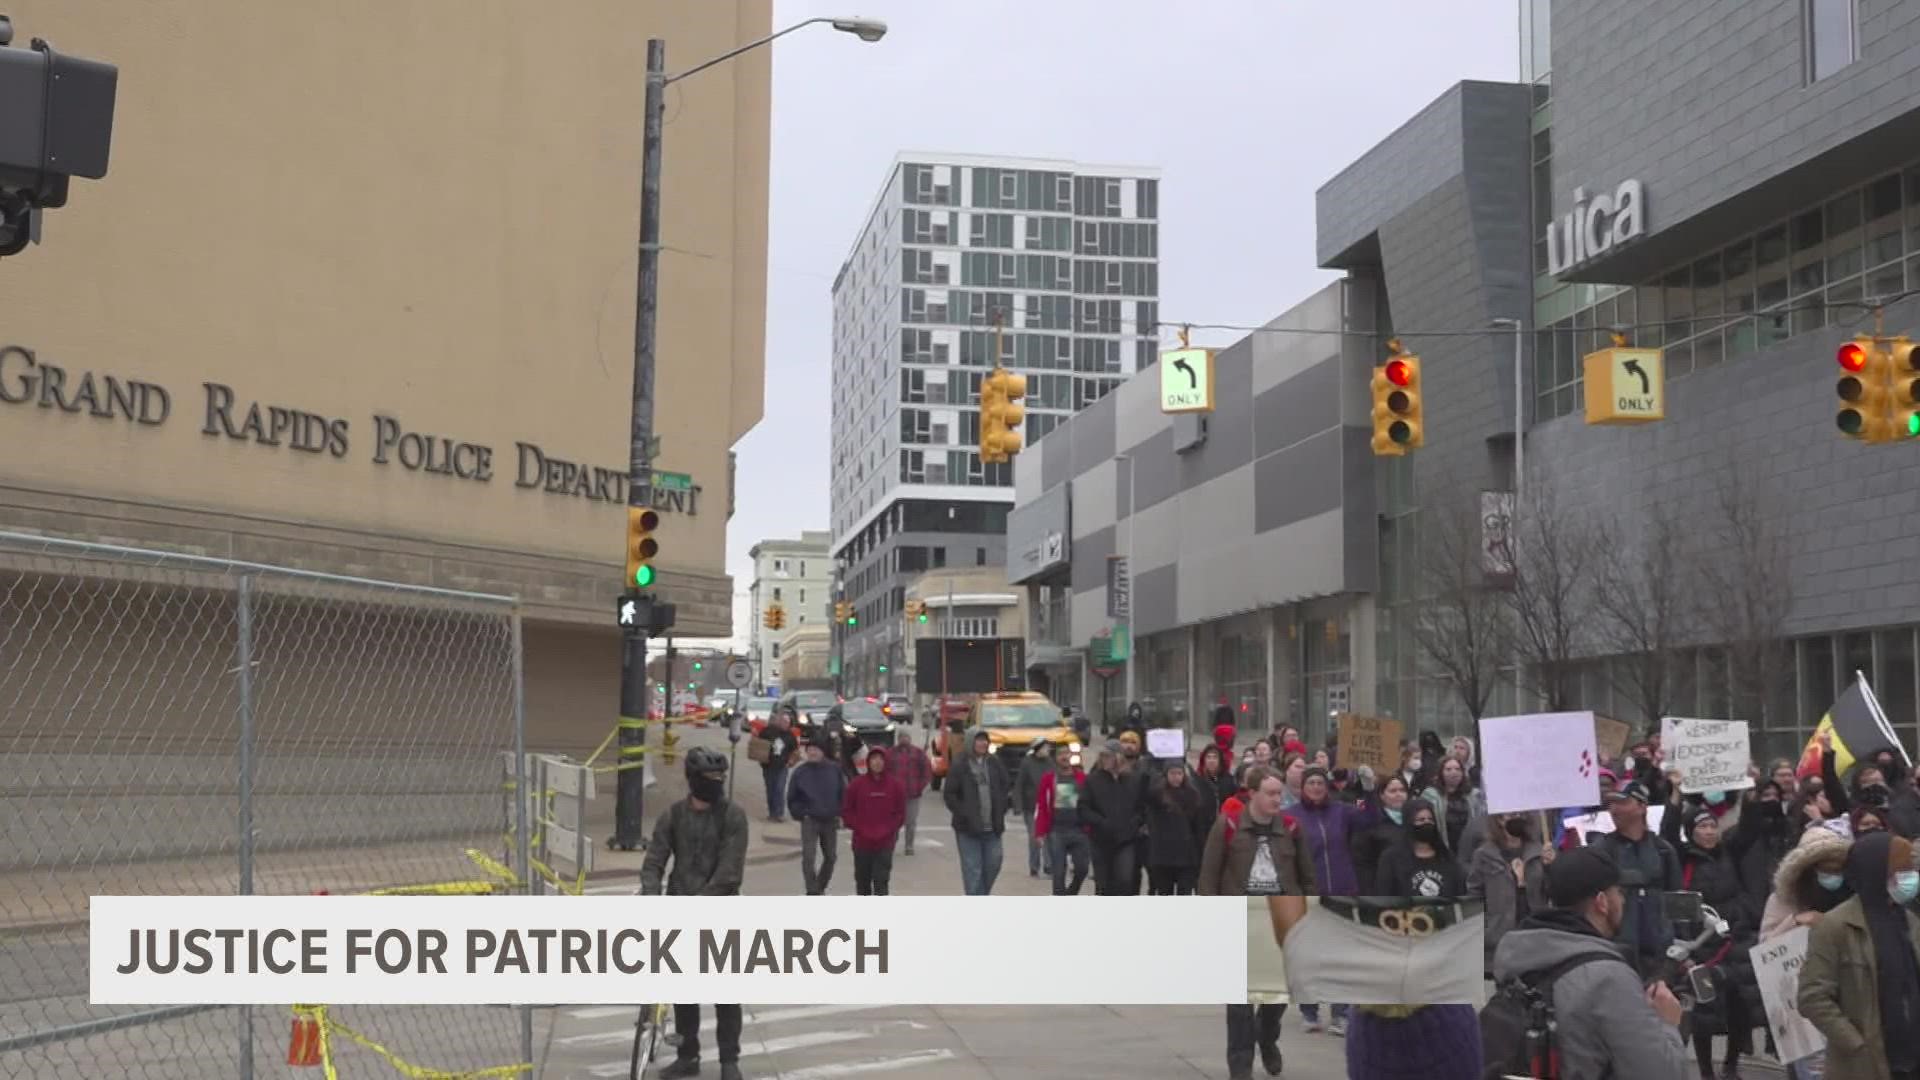 During the rally, the group stopped outside Grand Rapids Police Headquarters multiple times. For about four hours, about 100 marched through the city.